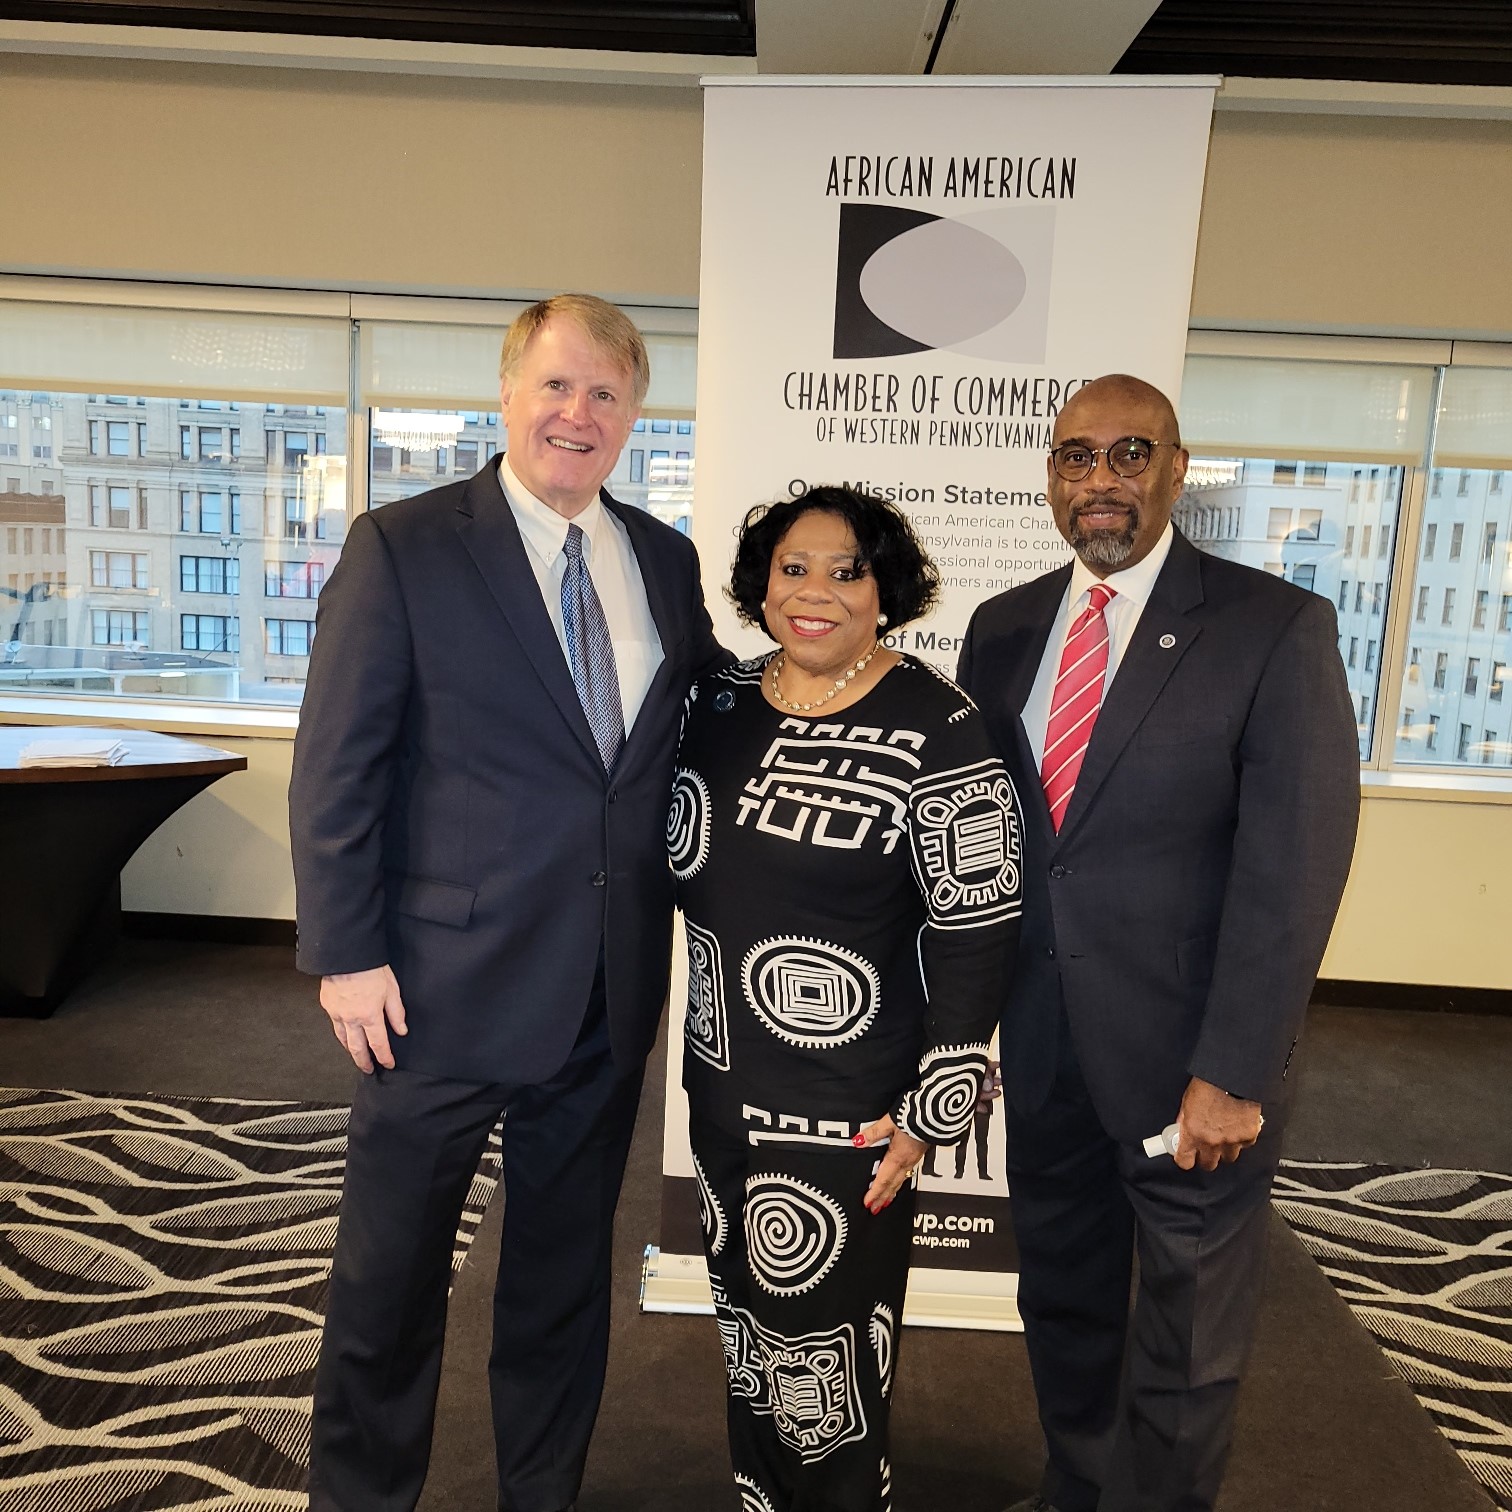 Dr. Alicia B. Harvey-Smith, Quintin Bullock, and Rich Fitzgerald posing together for a picture at the African American Chamber of Commerce breakfast.